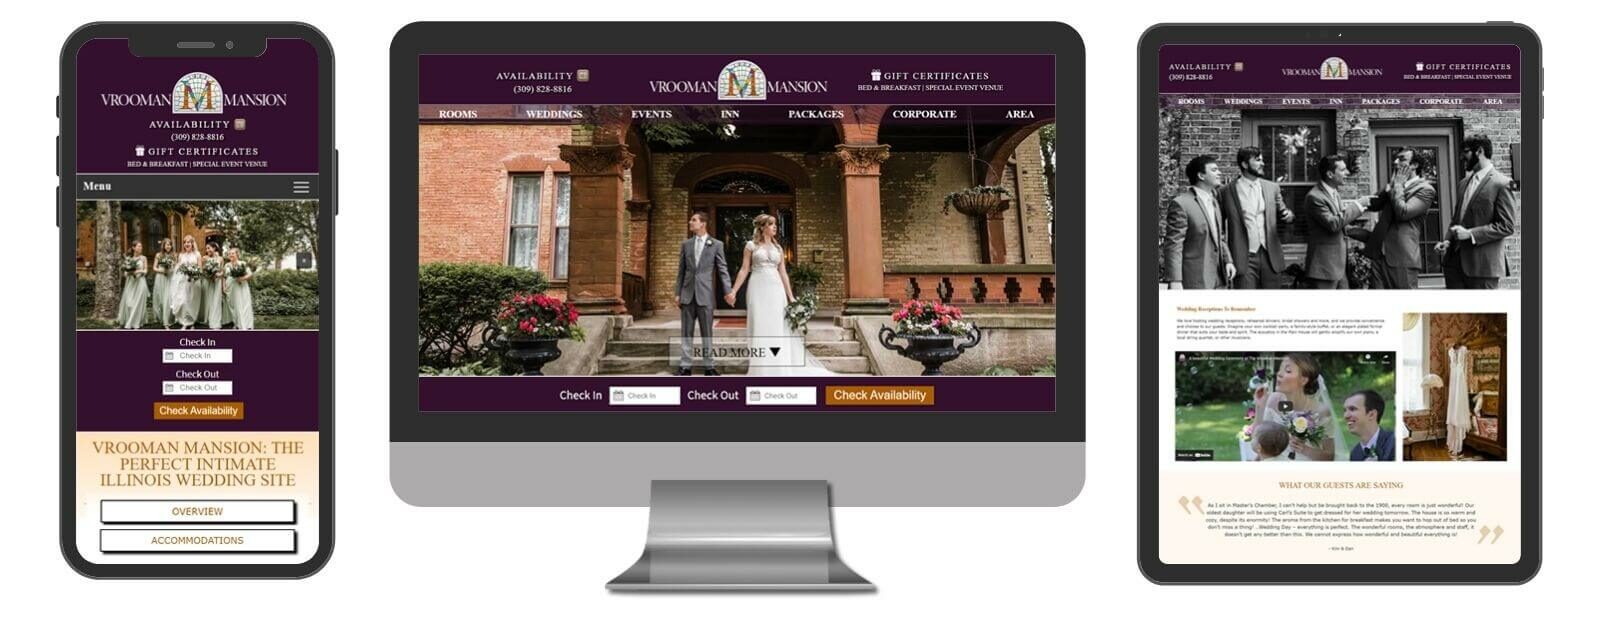 Vrooman Mansion website displayed in 3 sizes - mobile, template and desktop